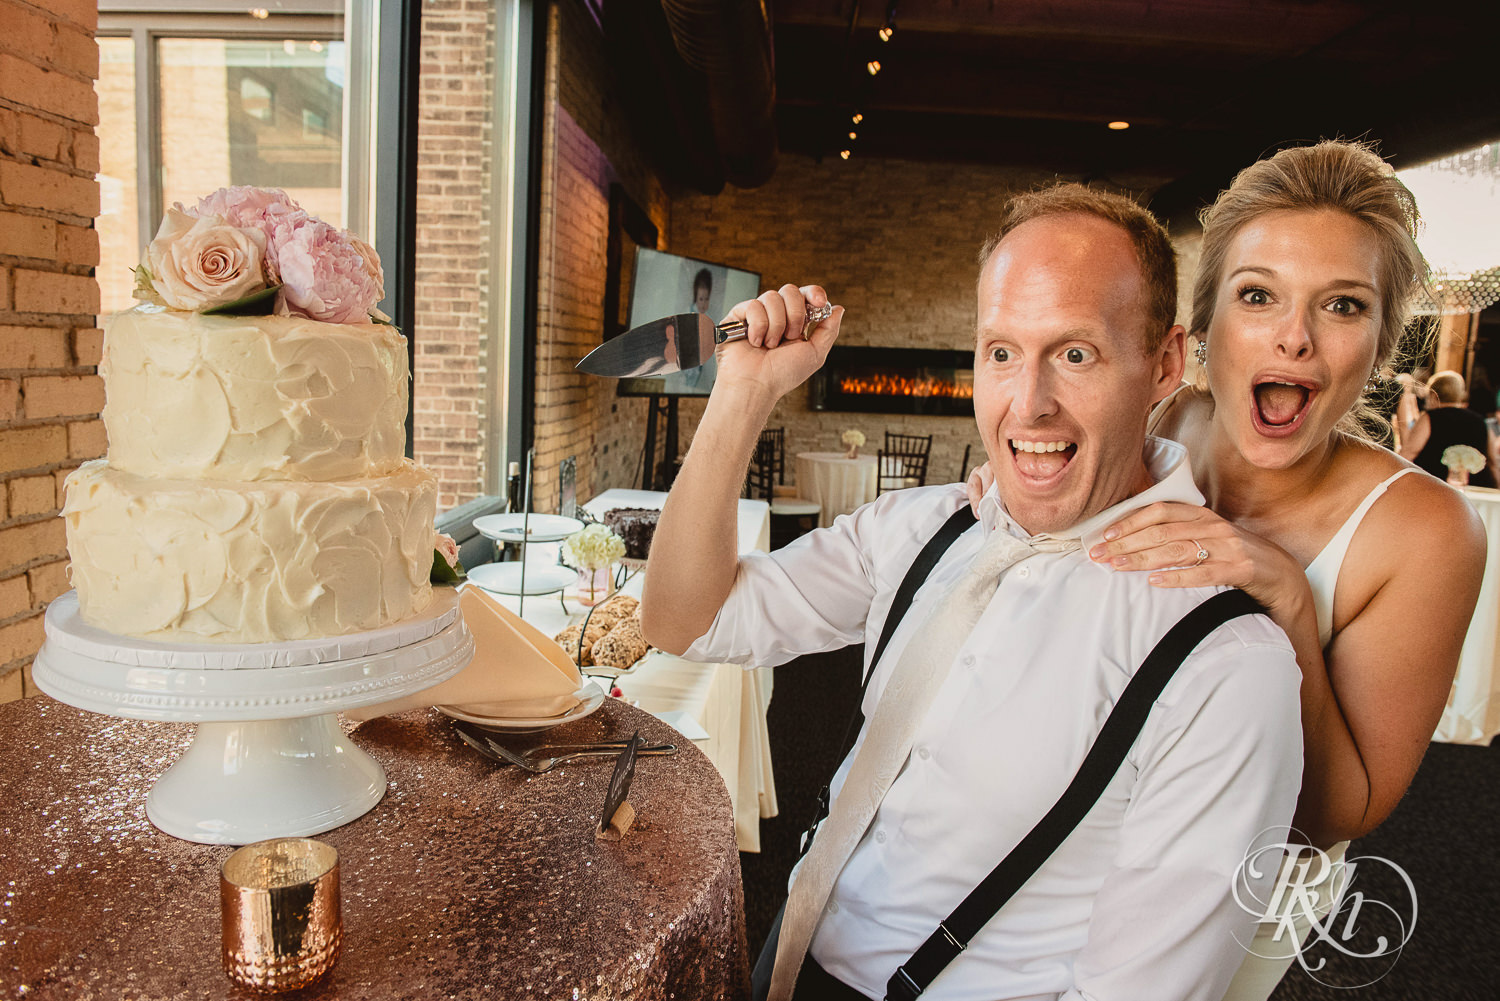 Bride and groom cut wedding cake during wedding reception at Minneapolis Event Centers in Minneapolis, Minnesota.